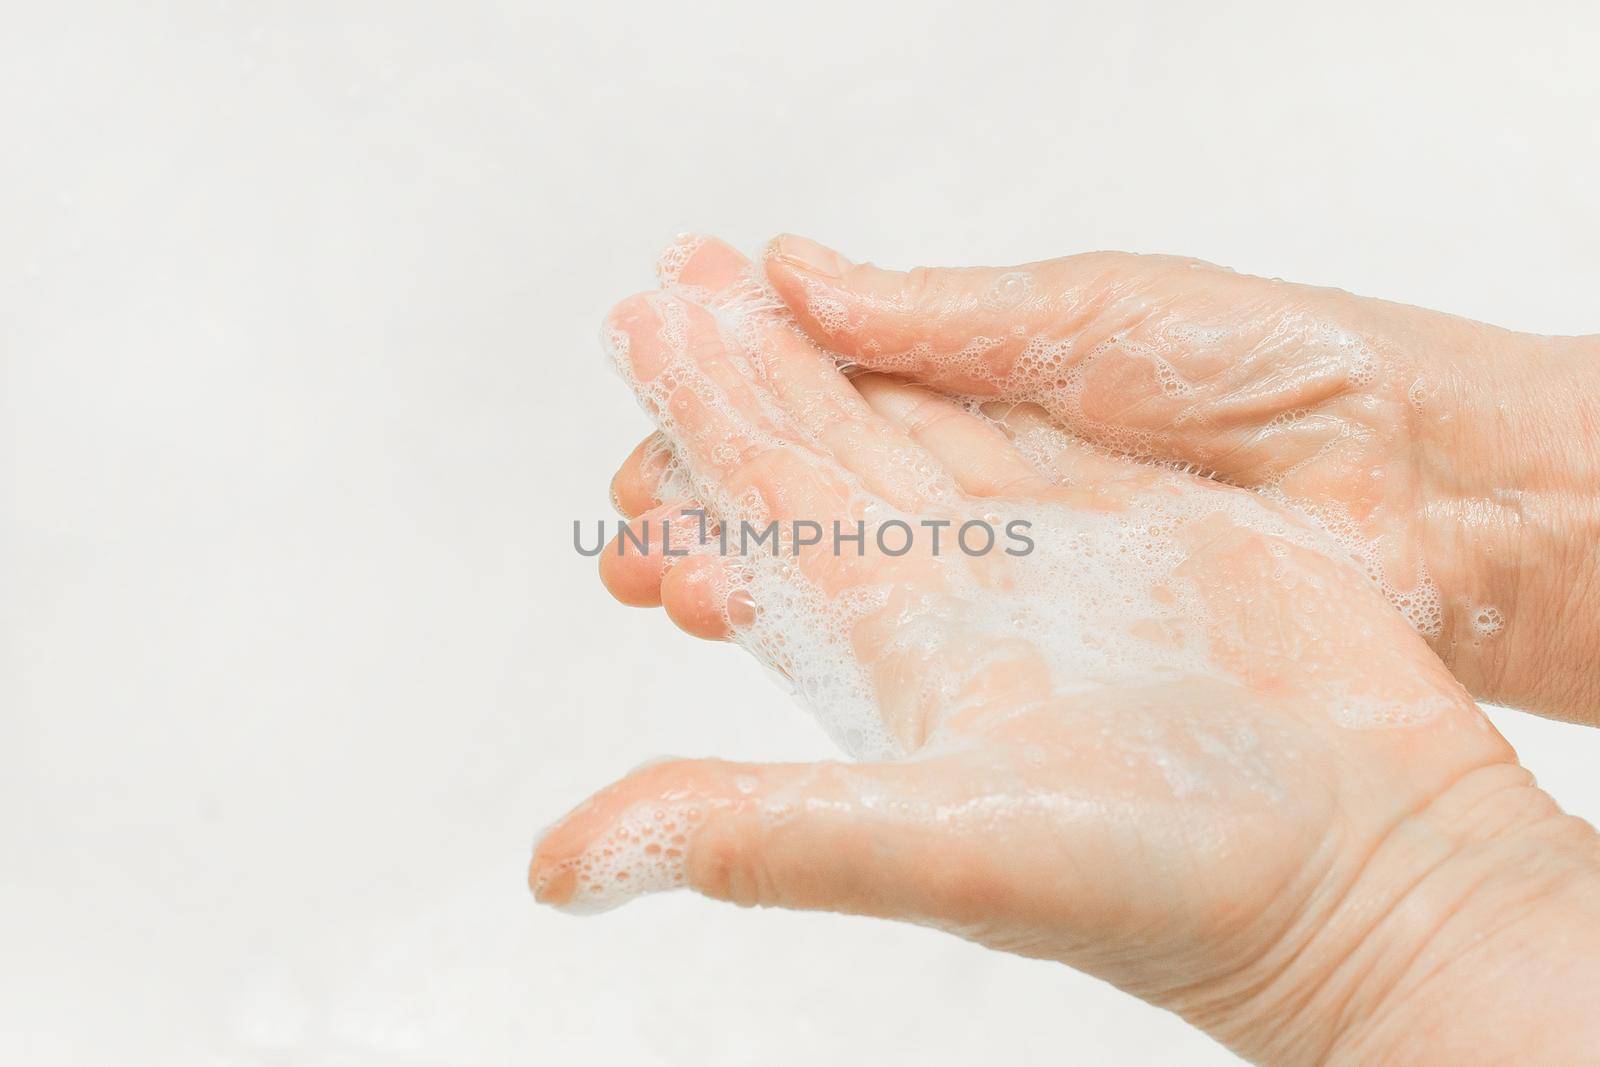 An adult woman's hands lathered with soap, close-up. Hand washing and domestic hygiene concept by AYDO8